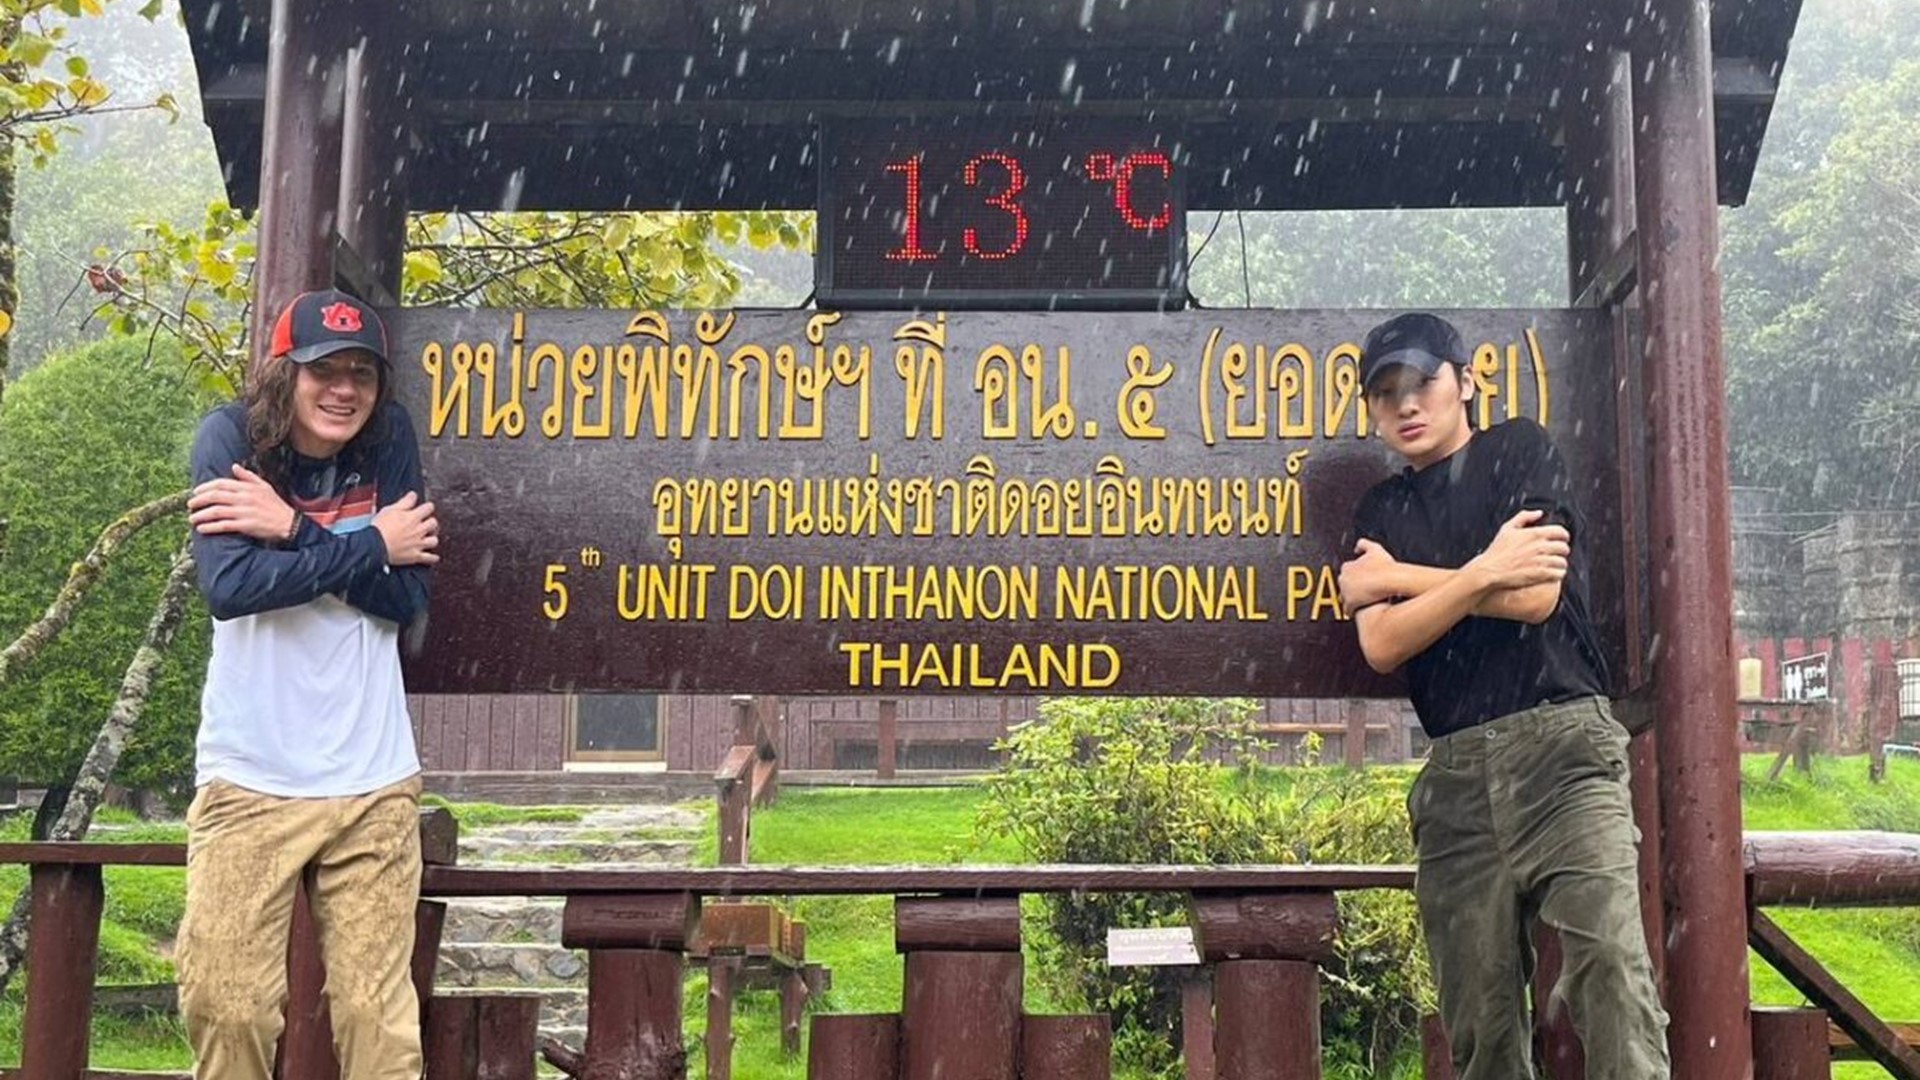 Sean Loh with teammate visiting National Park